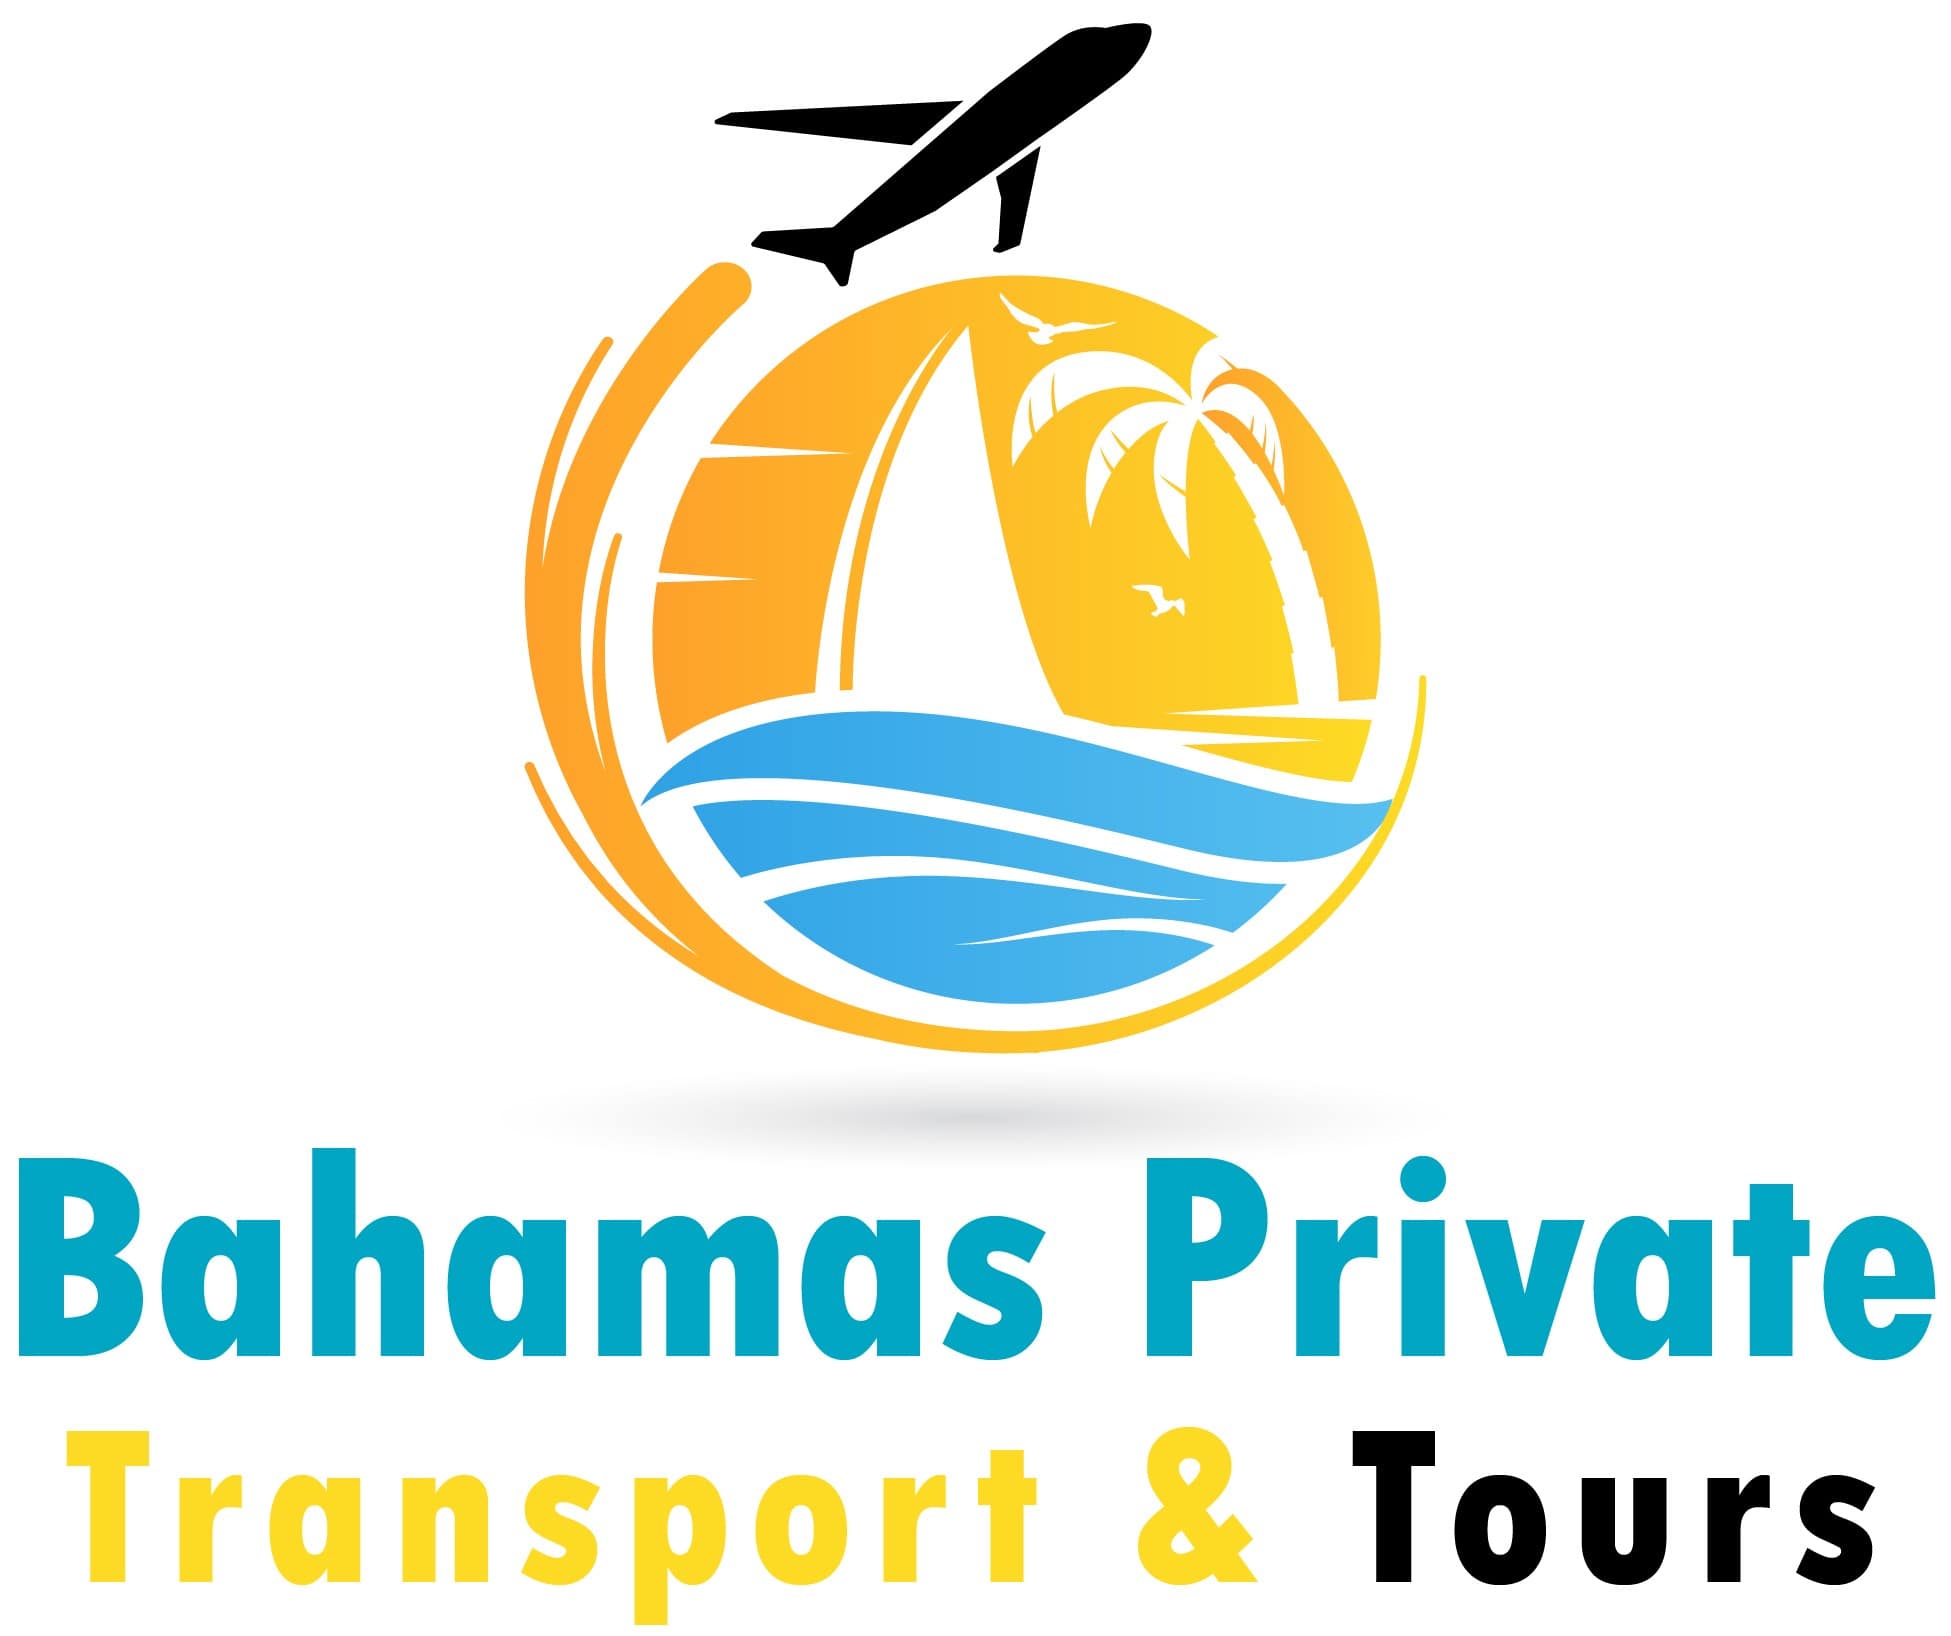 bahamas private transport and tours logo